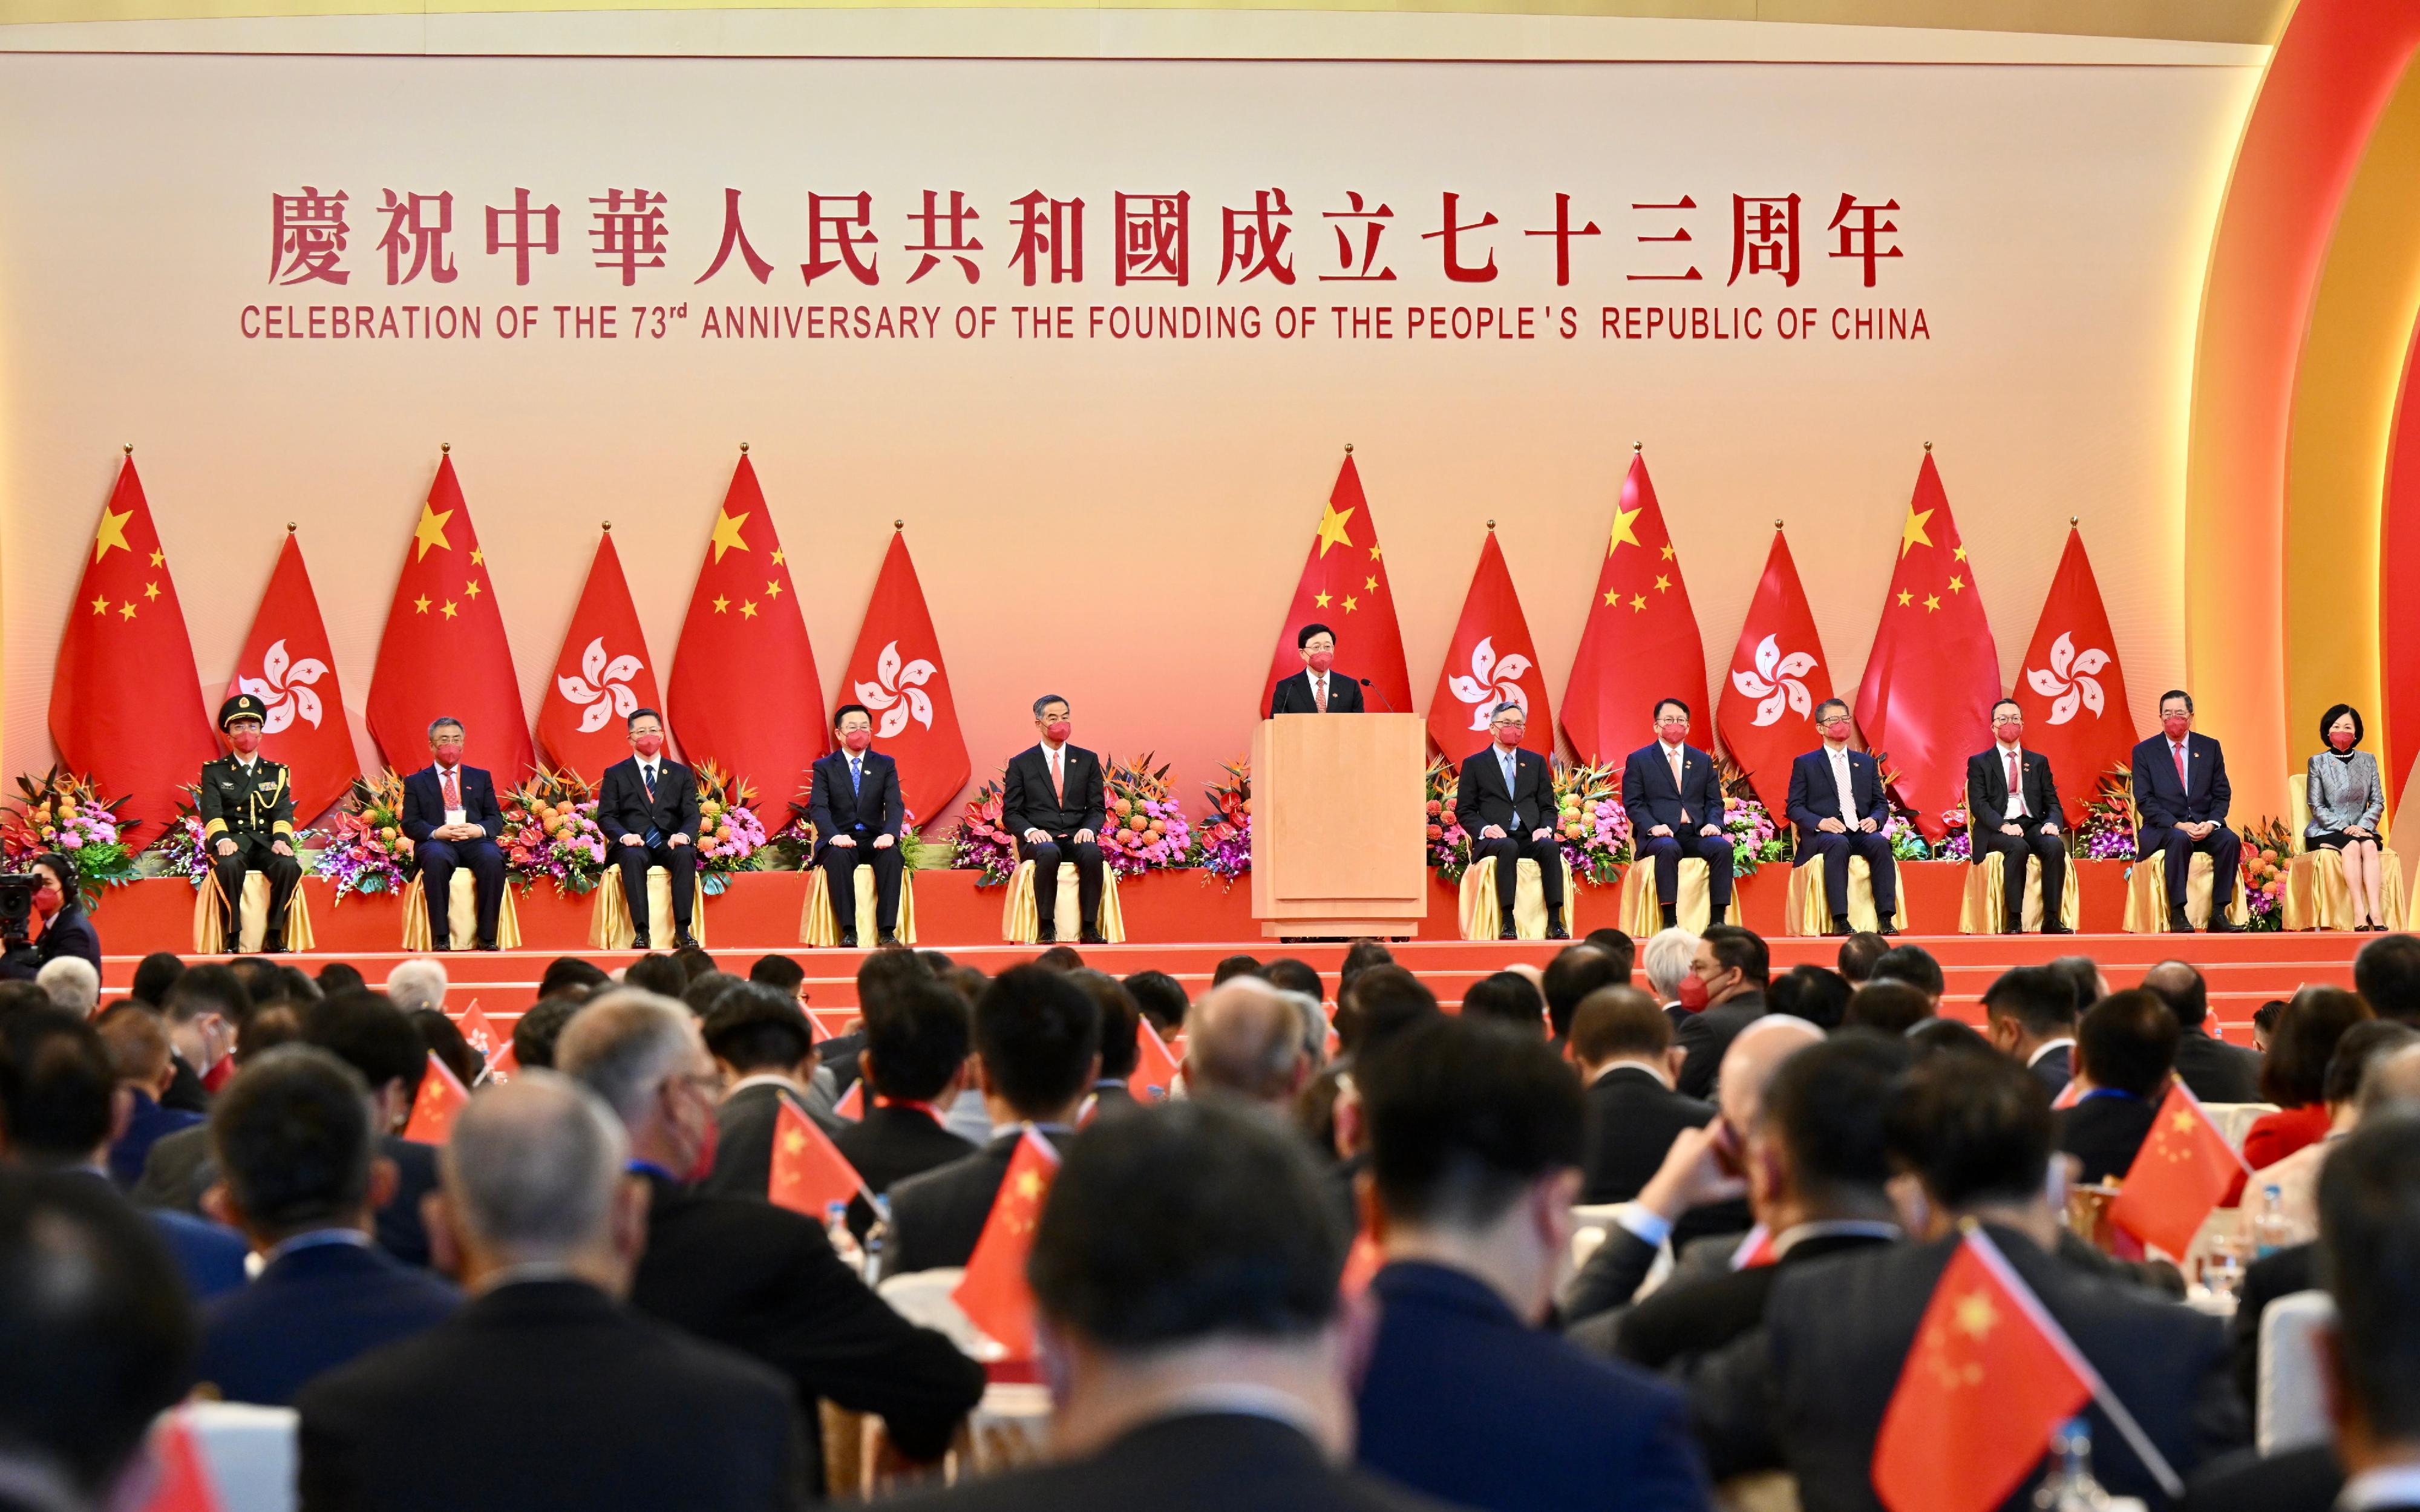 The Chief Executive, Mr John Lee, together with Principal Officials and guests, attends the reception for the 73rd anniversary of the founding of the People's Republic of China at the Hong Kong Convention and Exhibition Centre this morning (October 1).